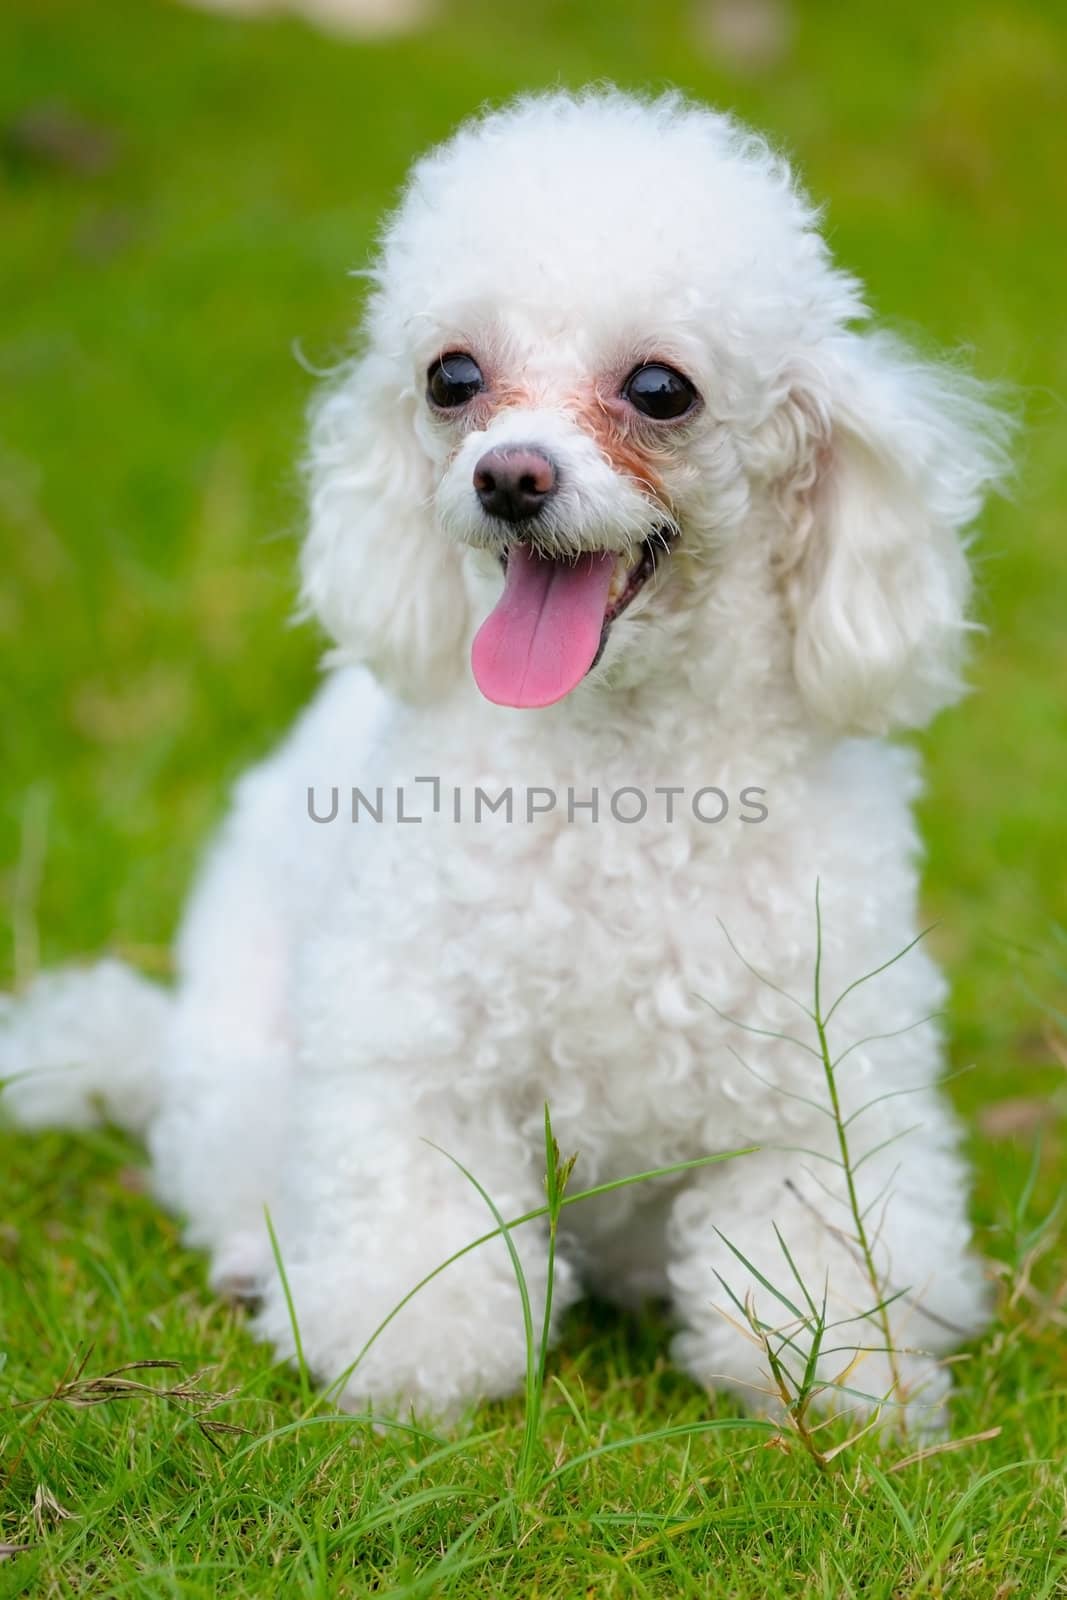 Toy poodle dog by raywoo